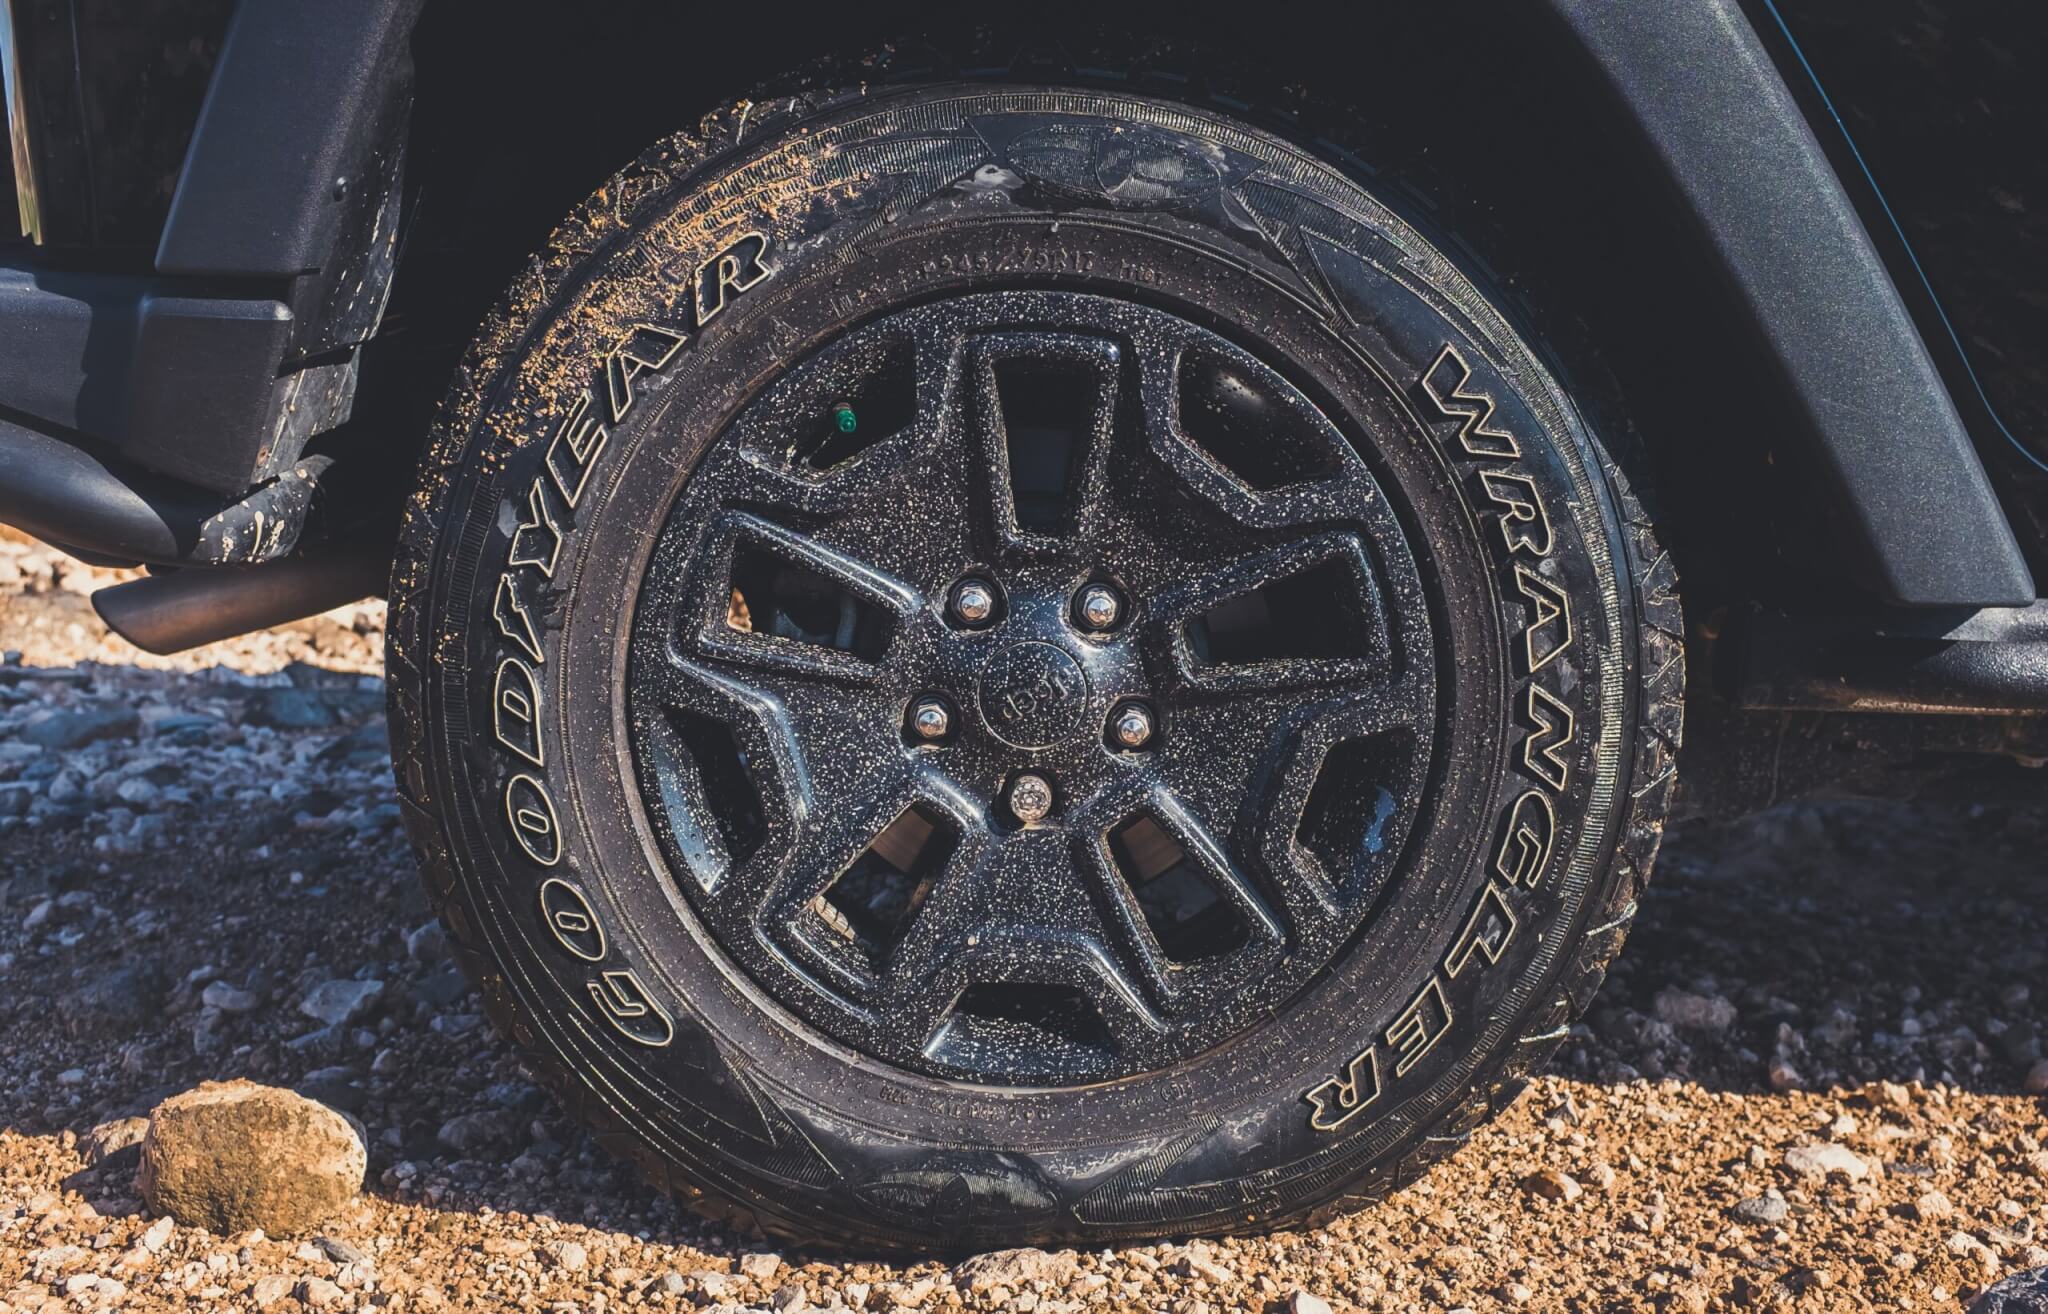 Goodyear tires on a Jeep Wrangler